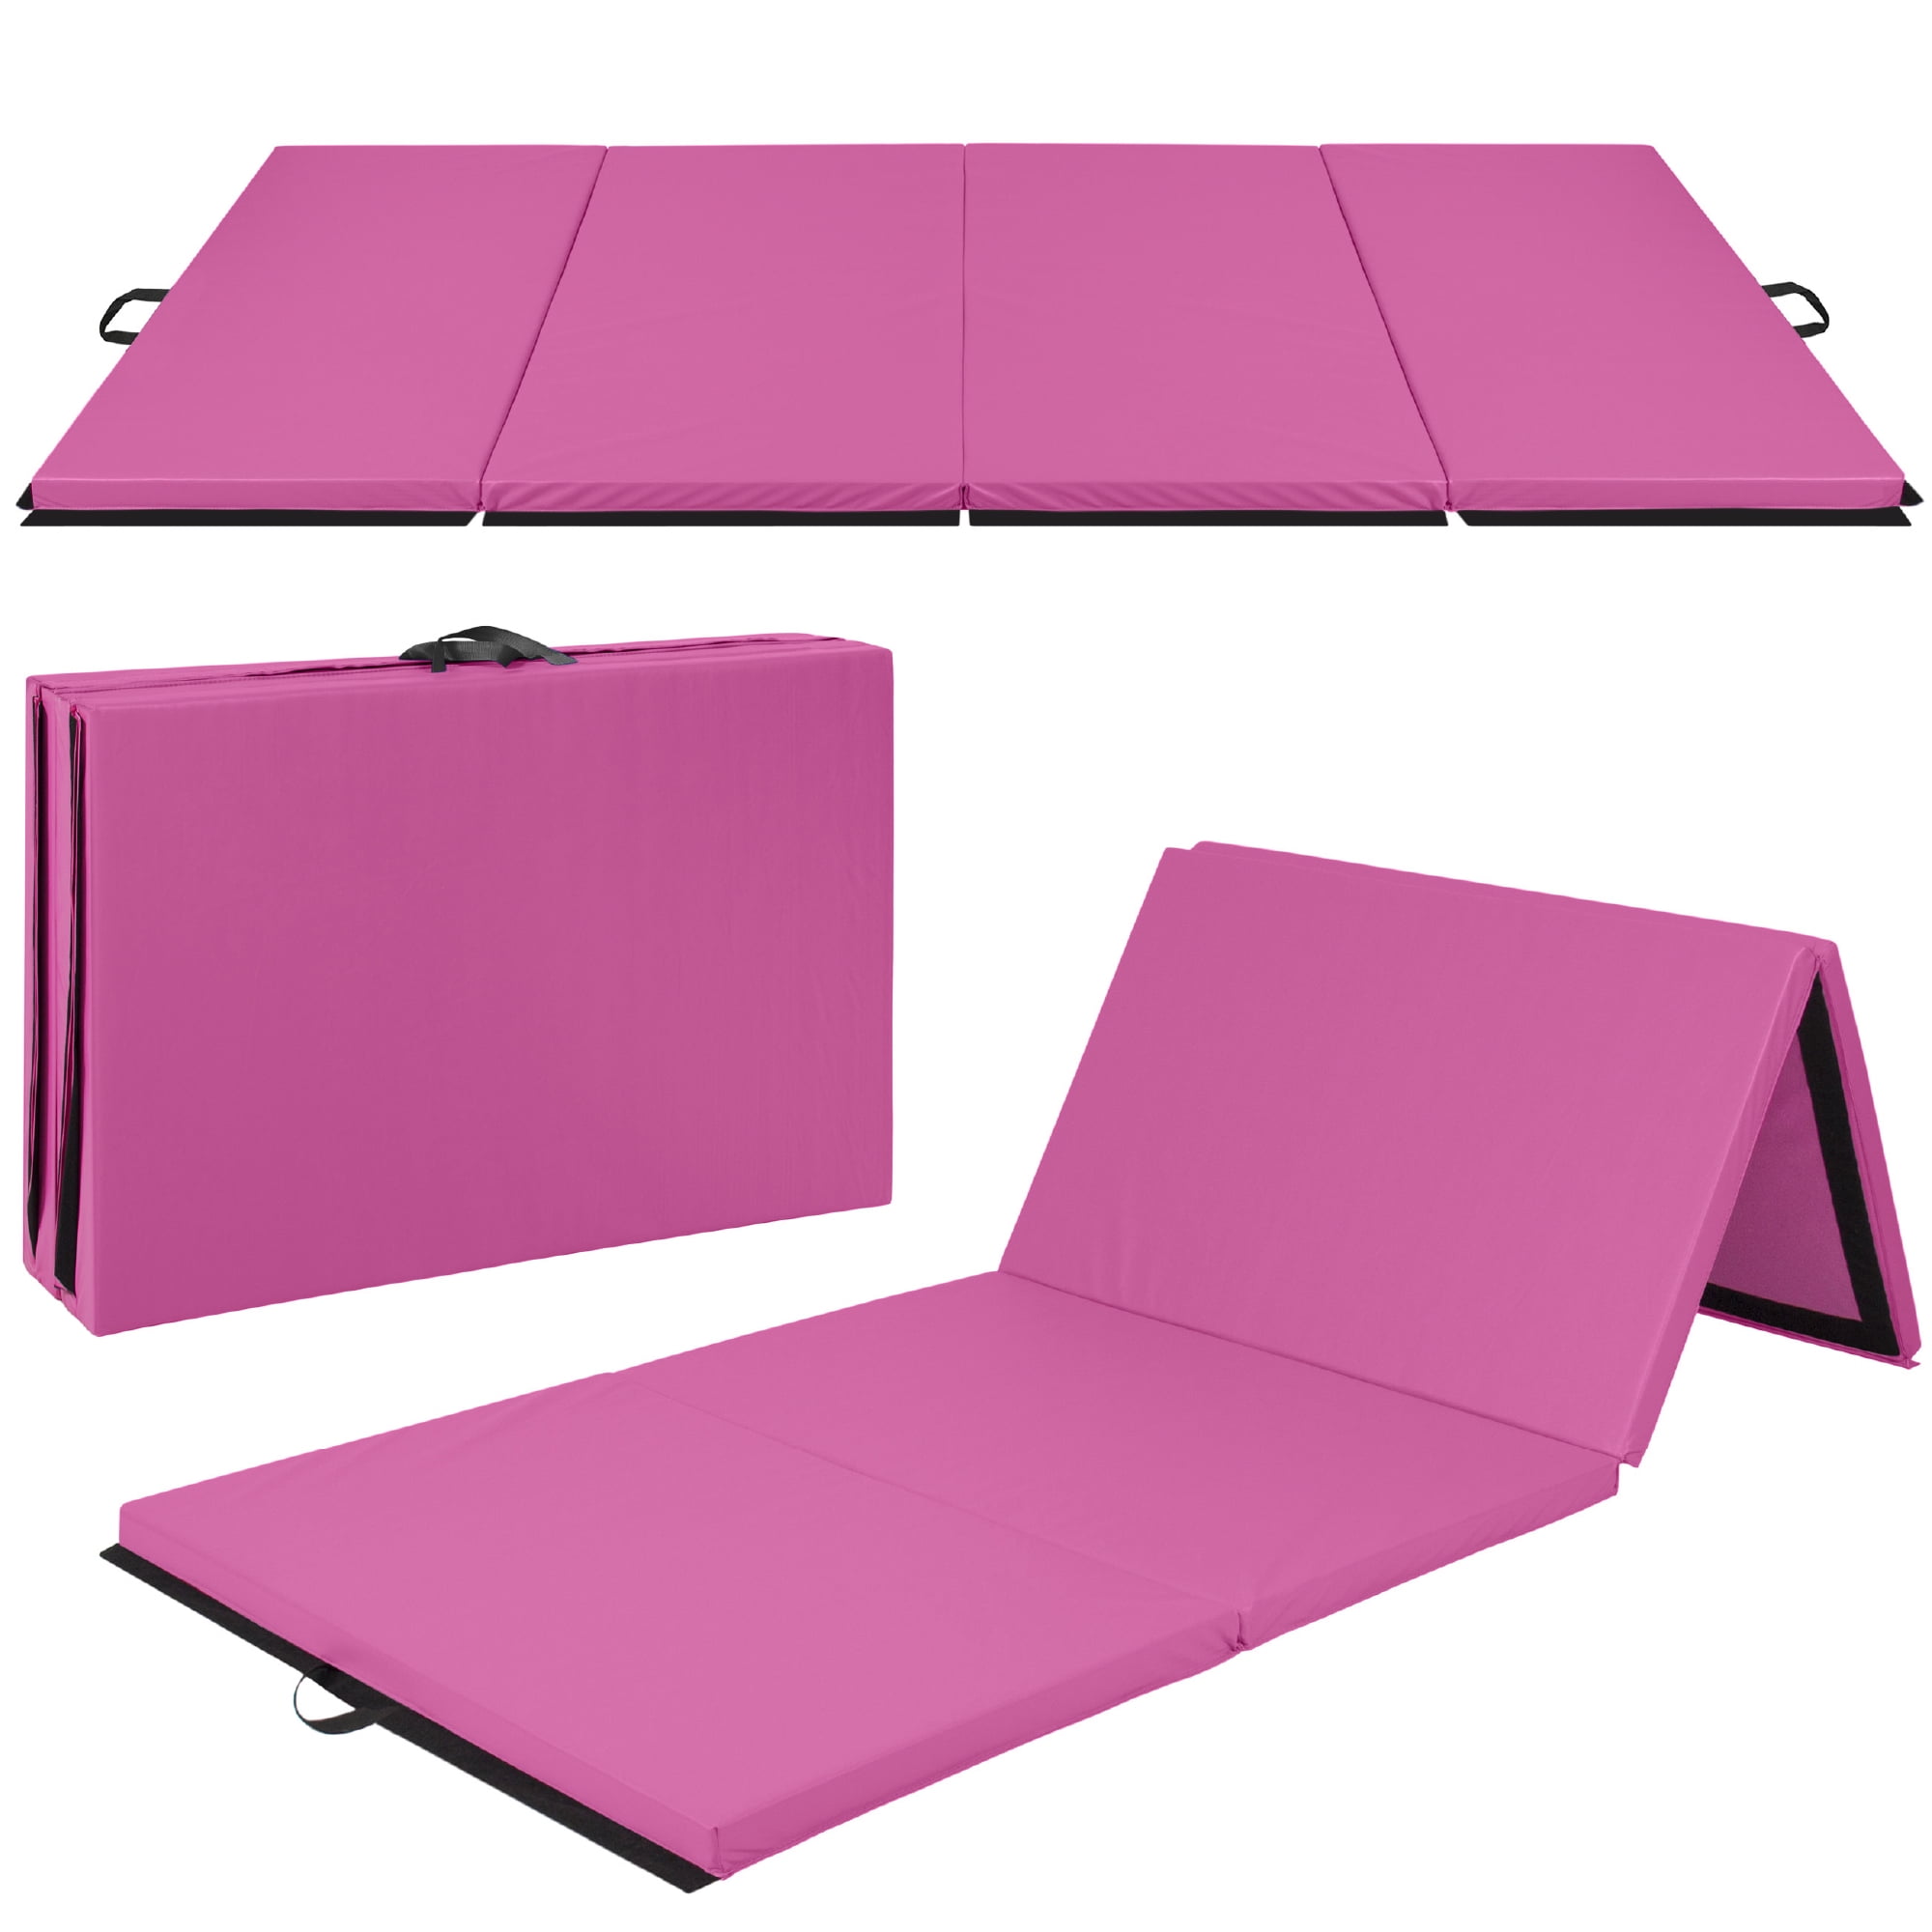 Details about   Folding Mat Thick Foam Fitness Exercise Gymnastics Panel Gym Workout Pink 